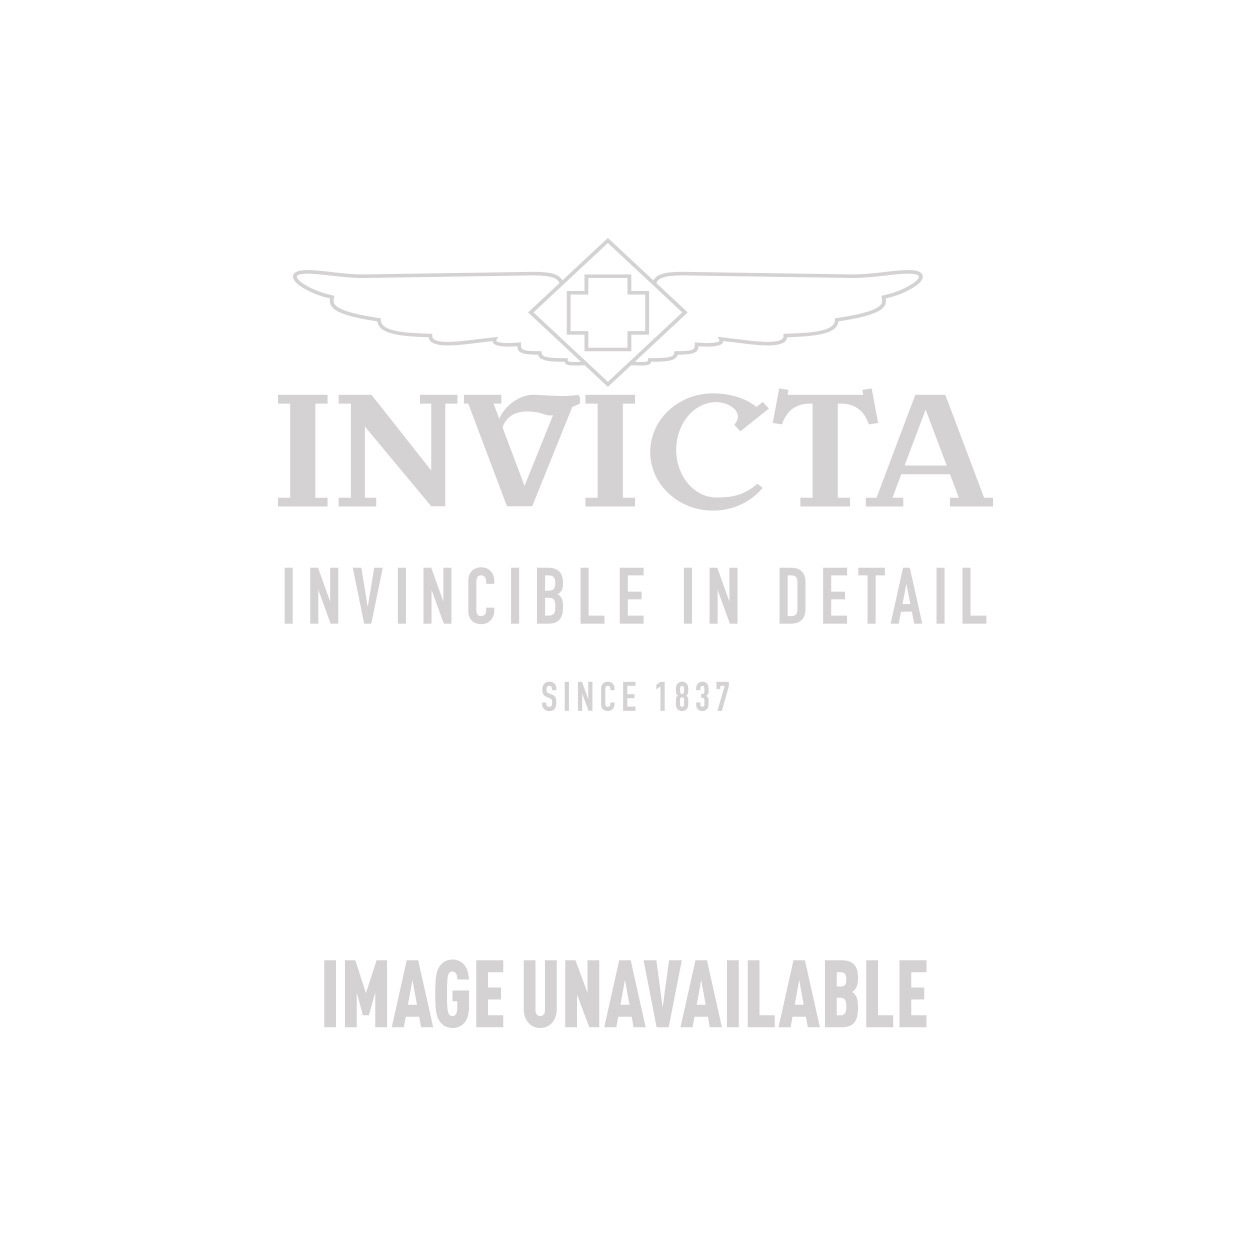 Invincible Guarantee - 100% Replacement Guarantee for Watches, Tier 11- 50-49